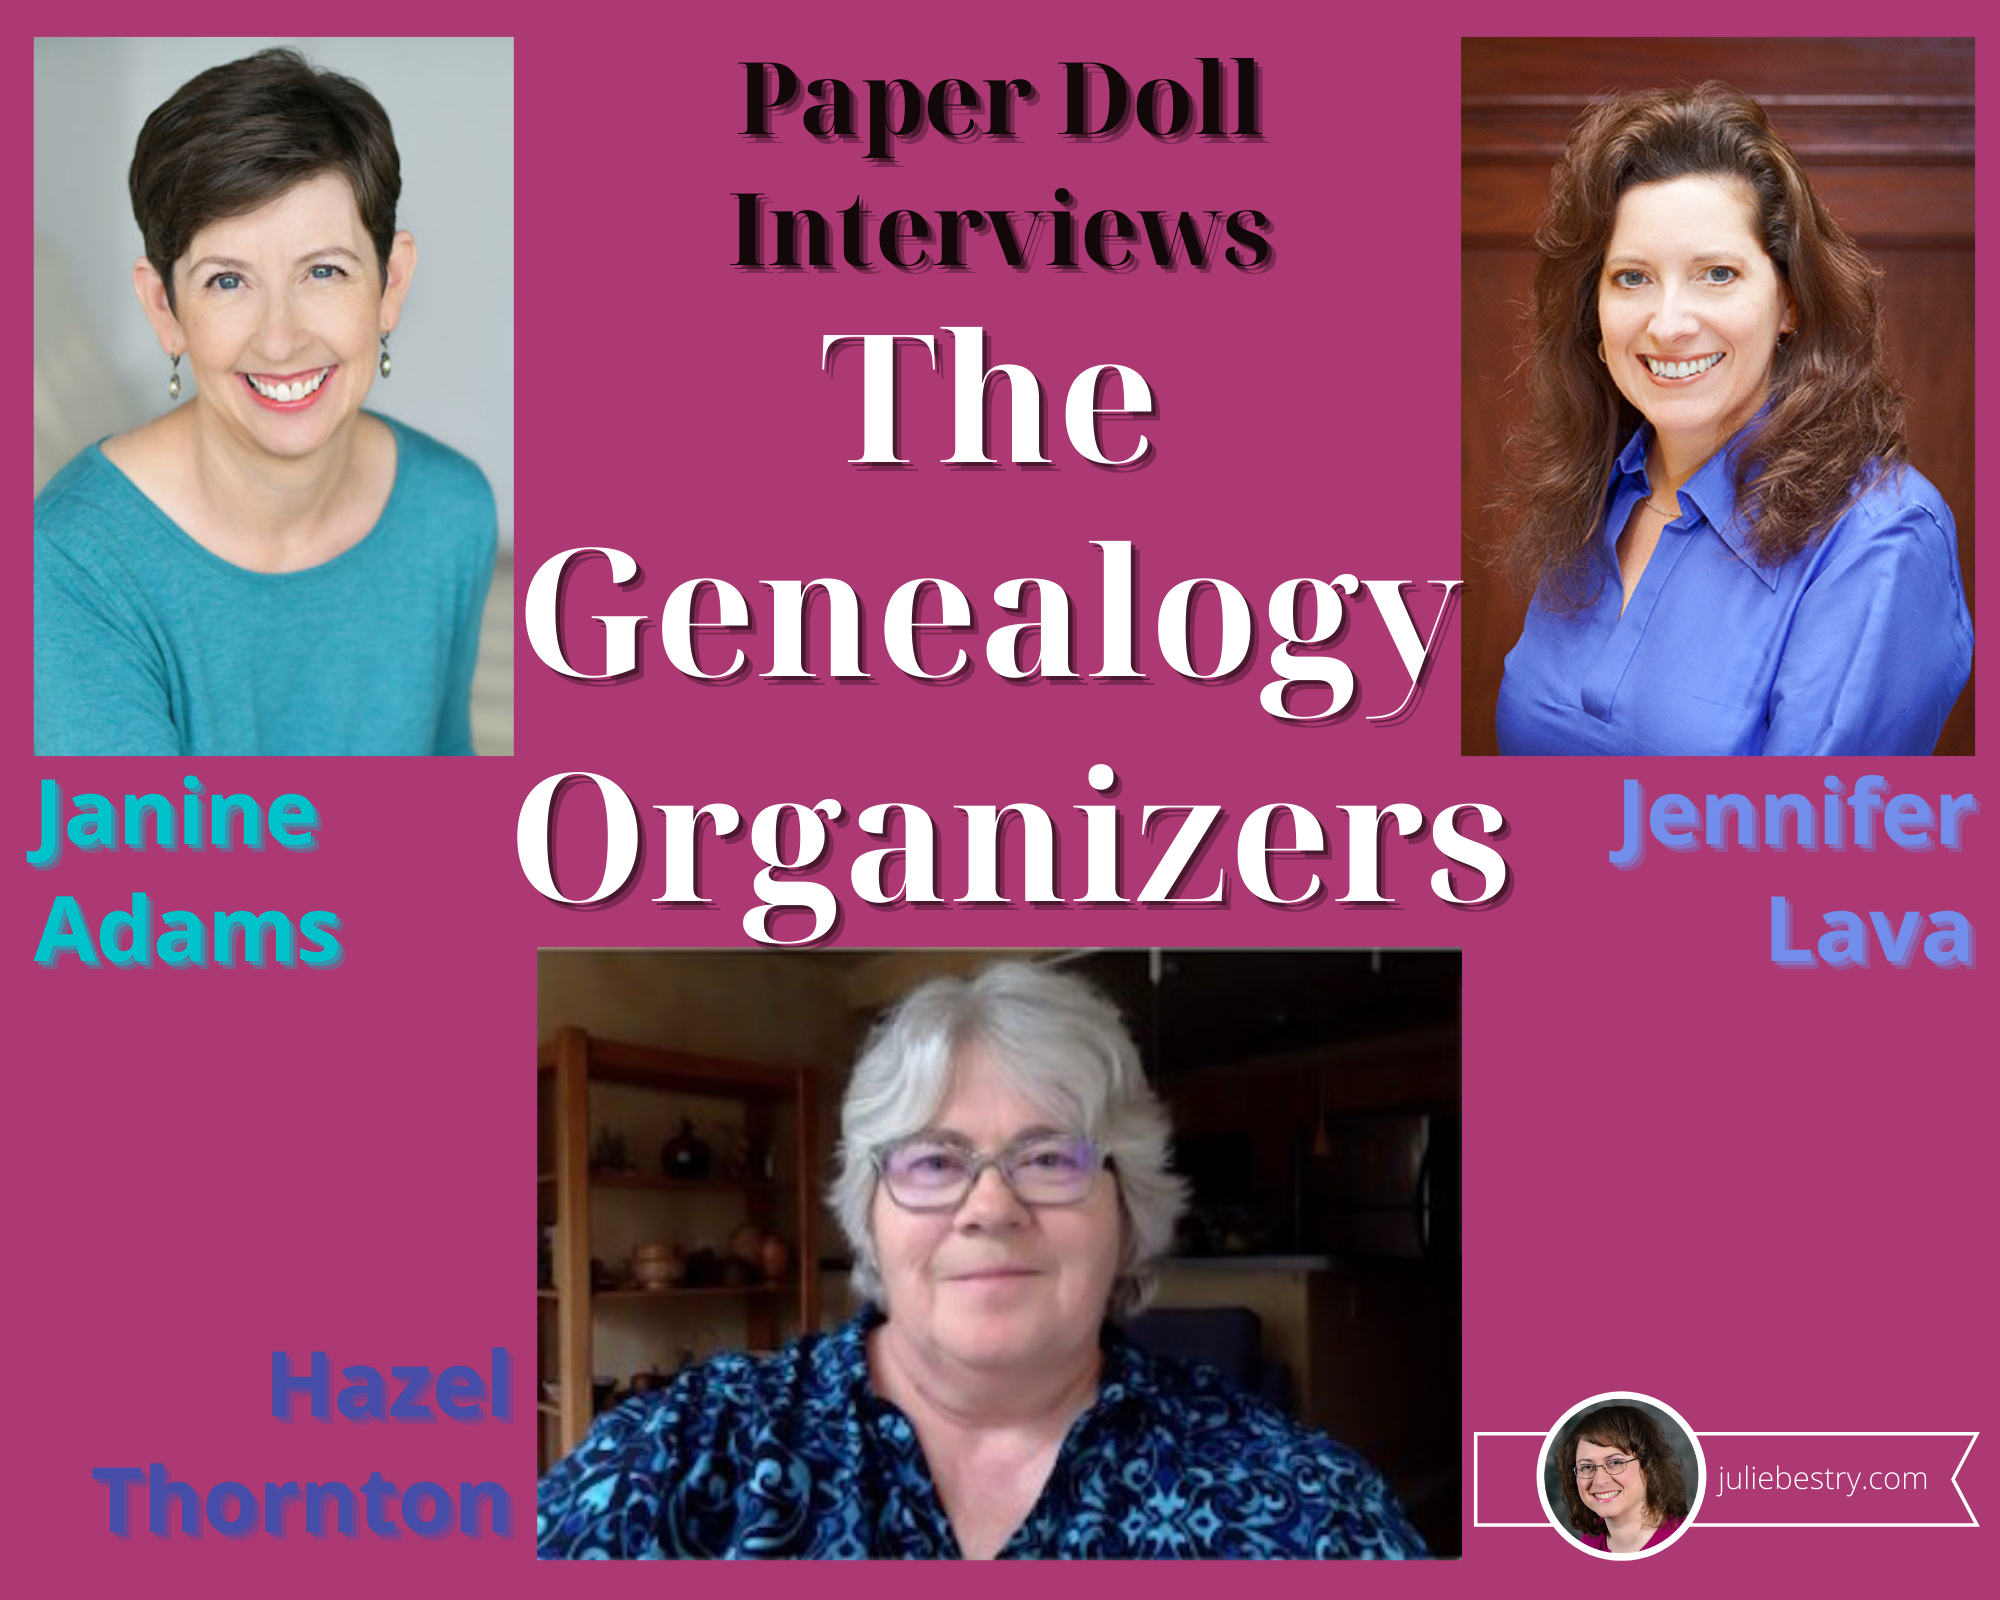 Paper Doll Interviews the Genealogy Organizers